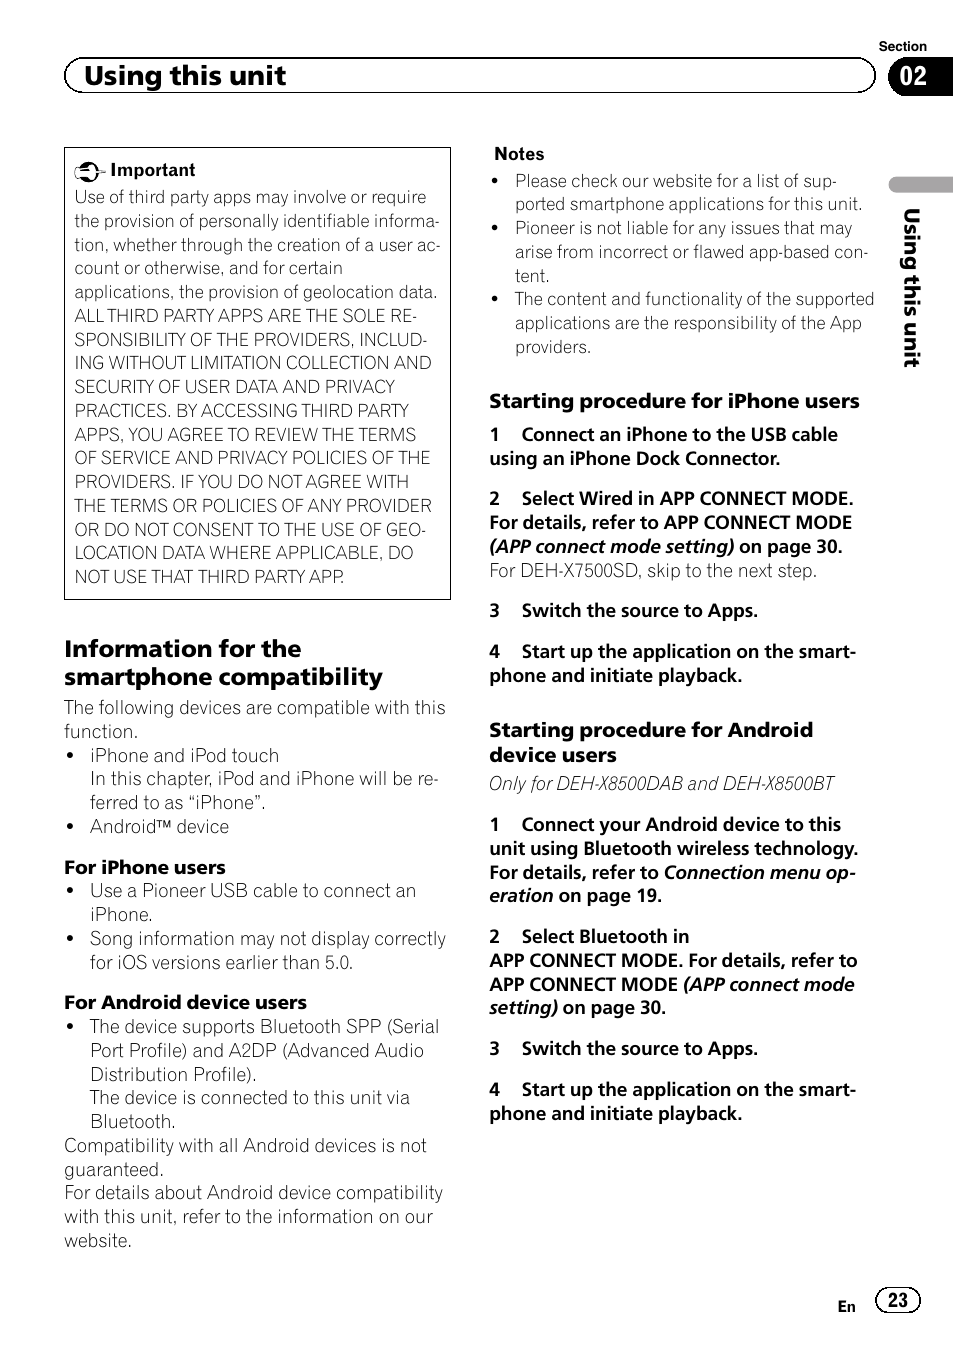 Using this unit, Information for the smartphone compatibility | Pioneer DEH- X8500DAB User Manual | Page 23 / 44 | Original mode